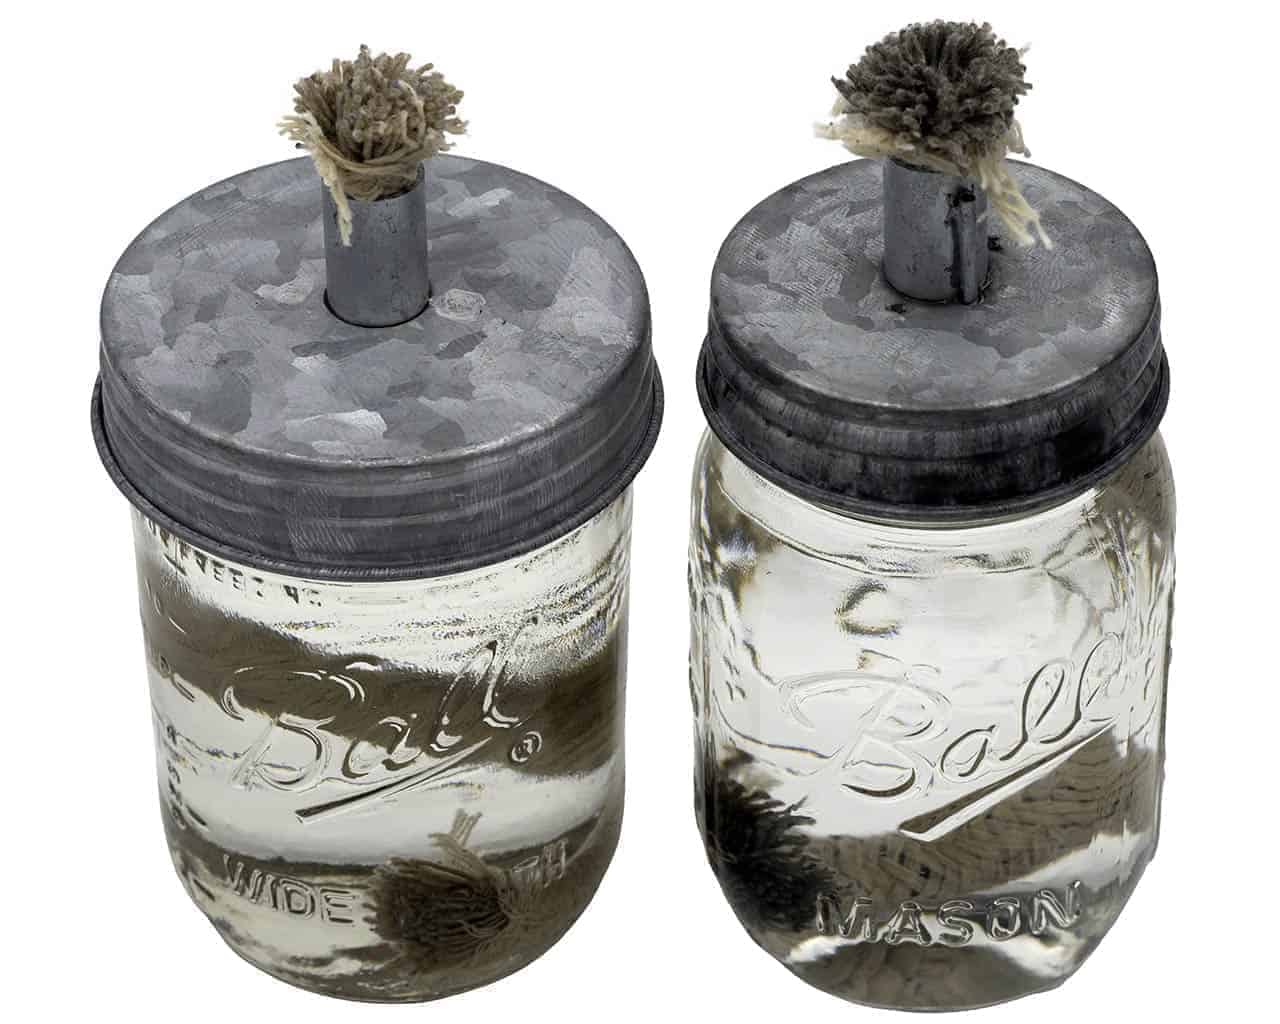 Unique Quality Rustic OIL LAMP Barn Roof Gray LID and Wick for Mason Fruit Jars 